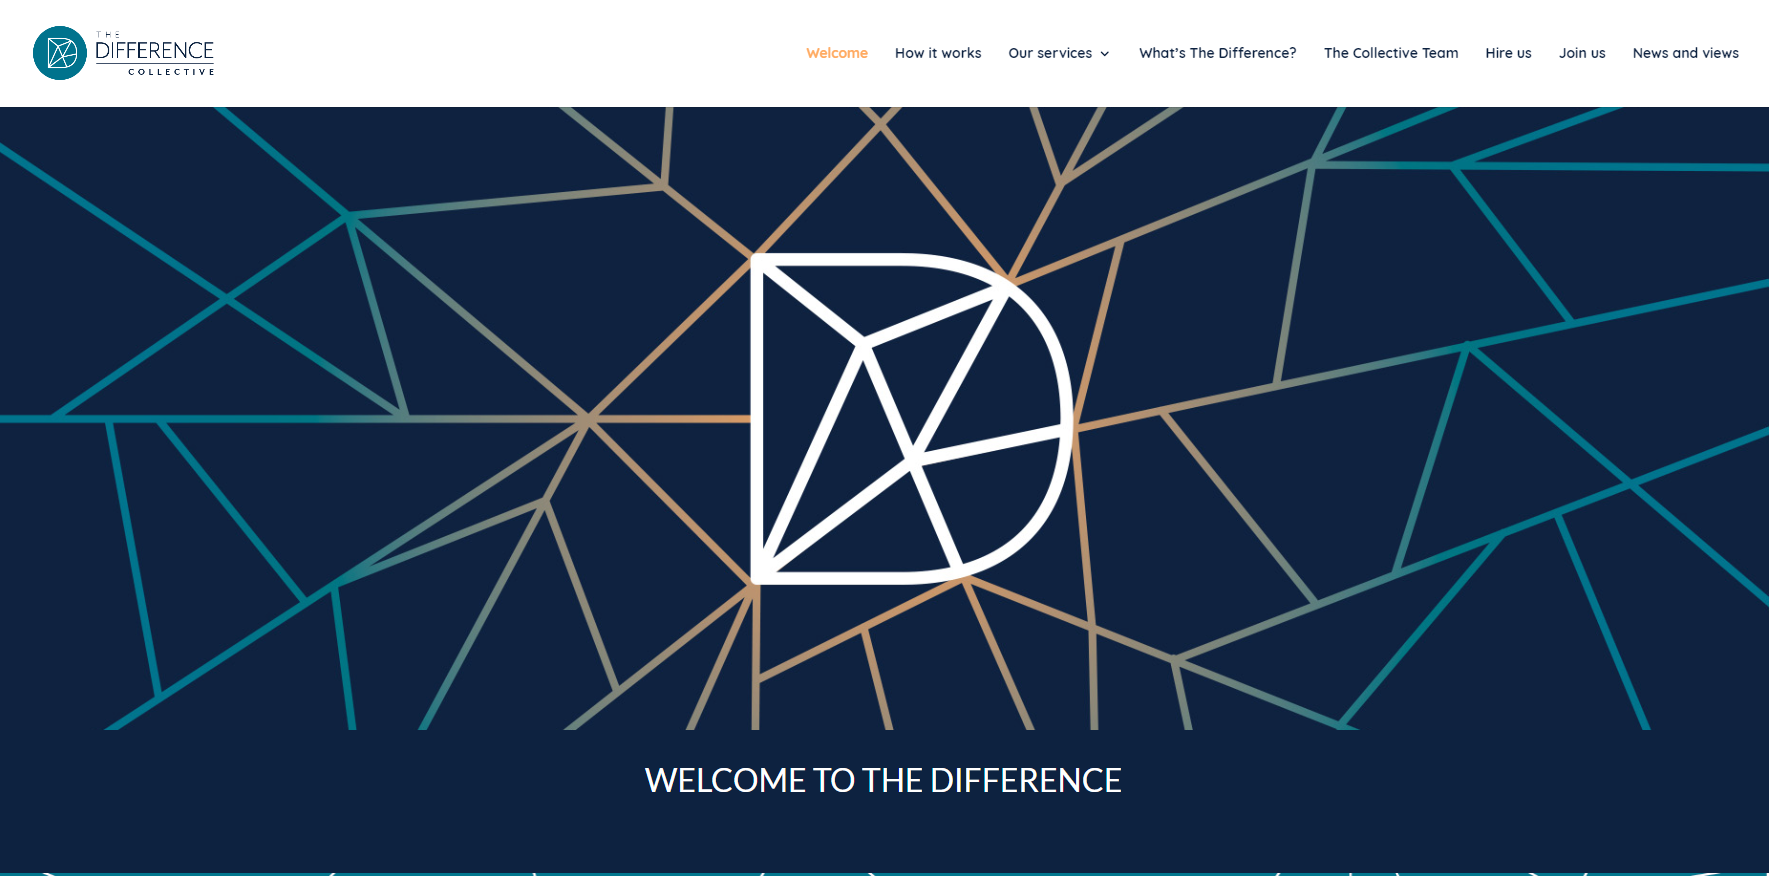 Screenshot of The Difference Collective website homepage